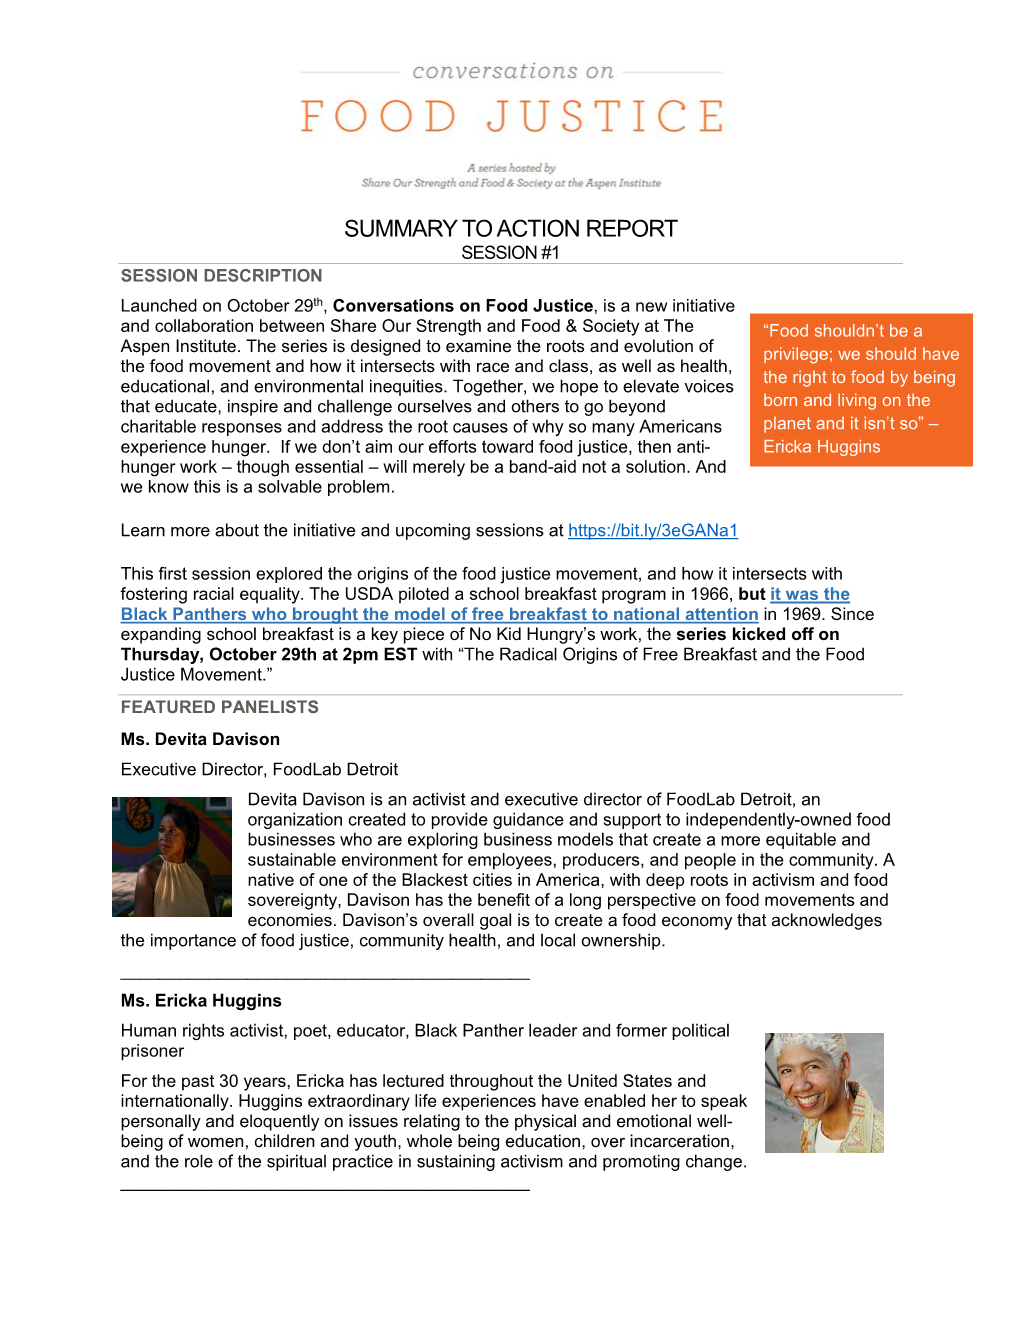 Summary to Action Report